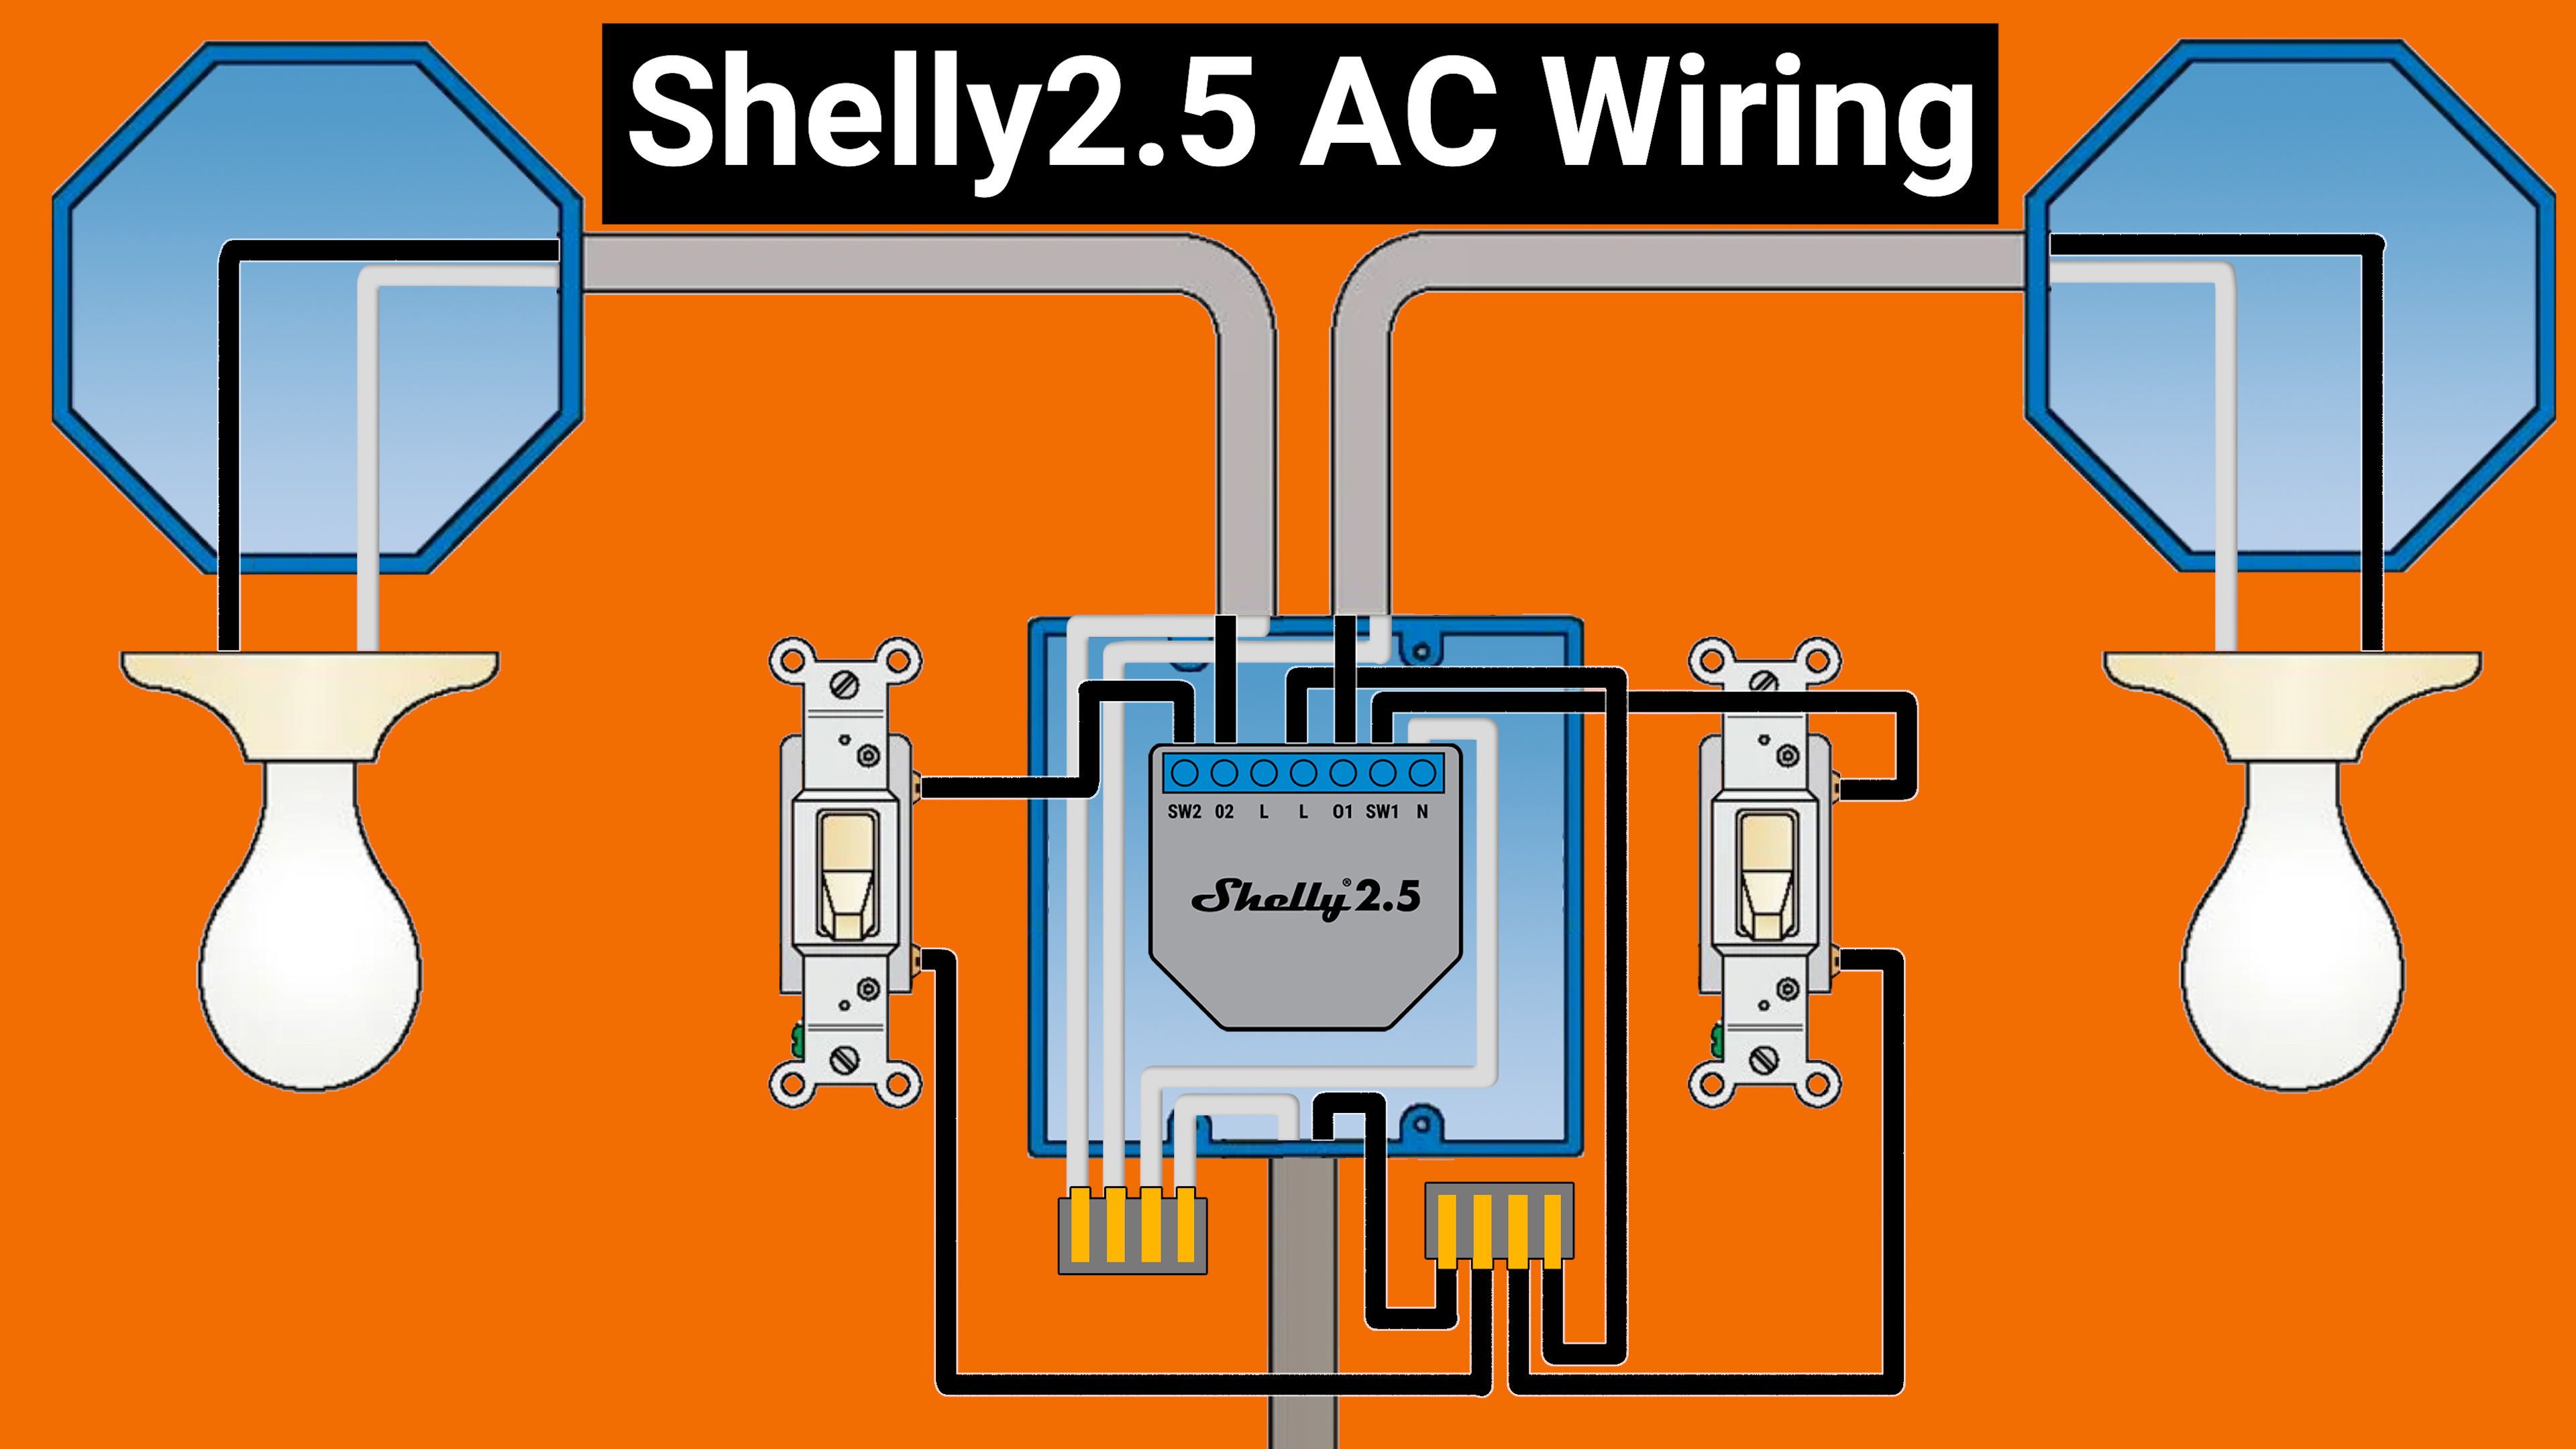 Shelly em Smart Energy Monitor - Wiring Guide 